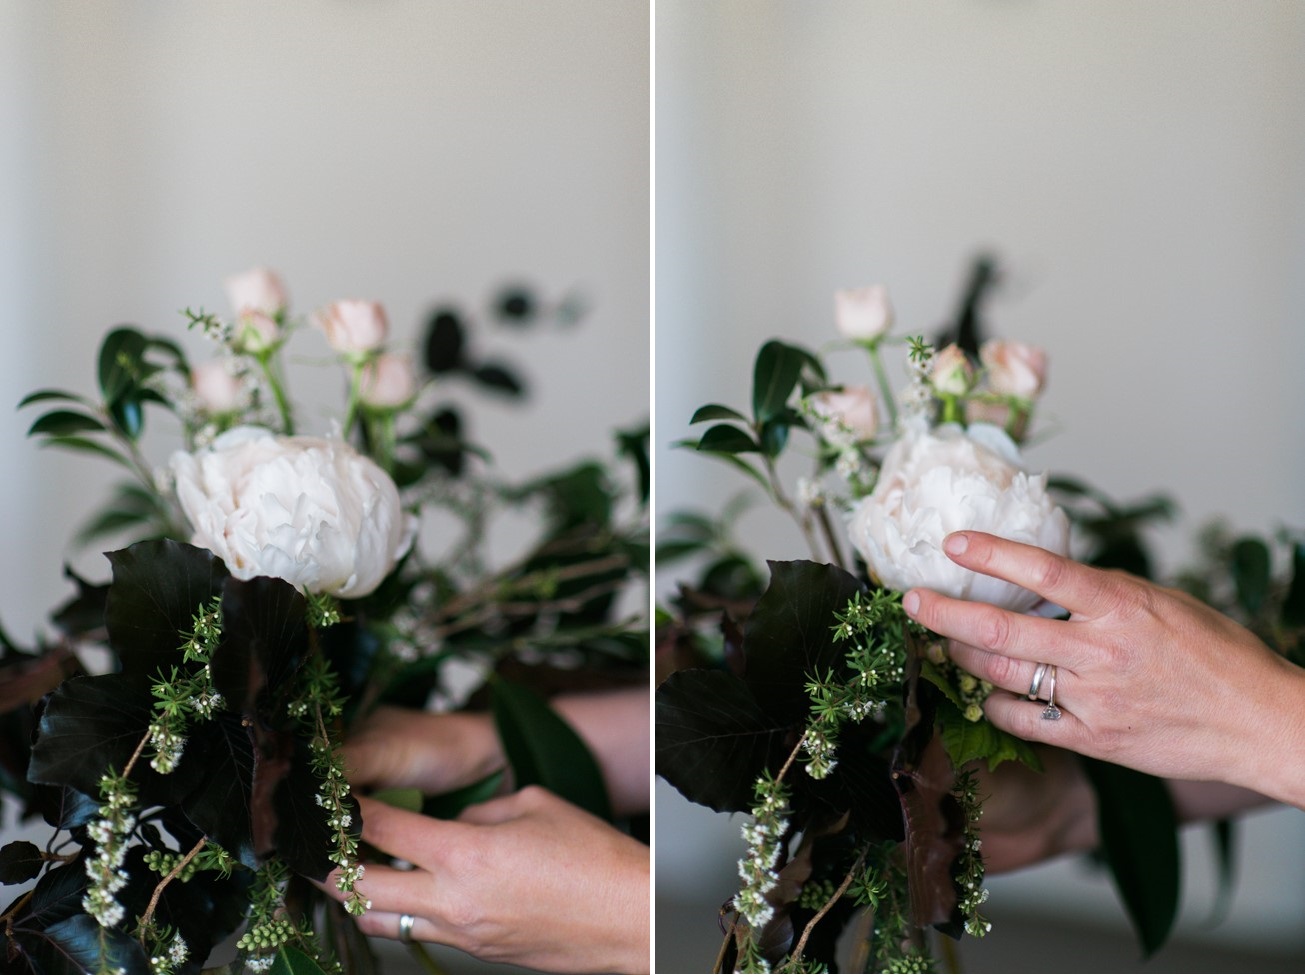 A Beautiful Vintage-Inspired Bridal Bouquet of Roses & Peonies